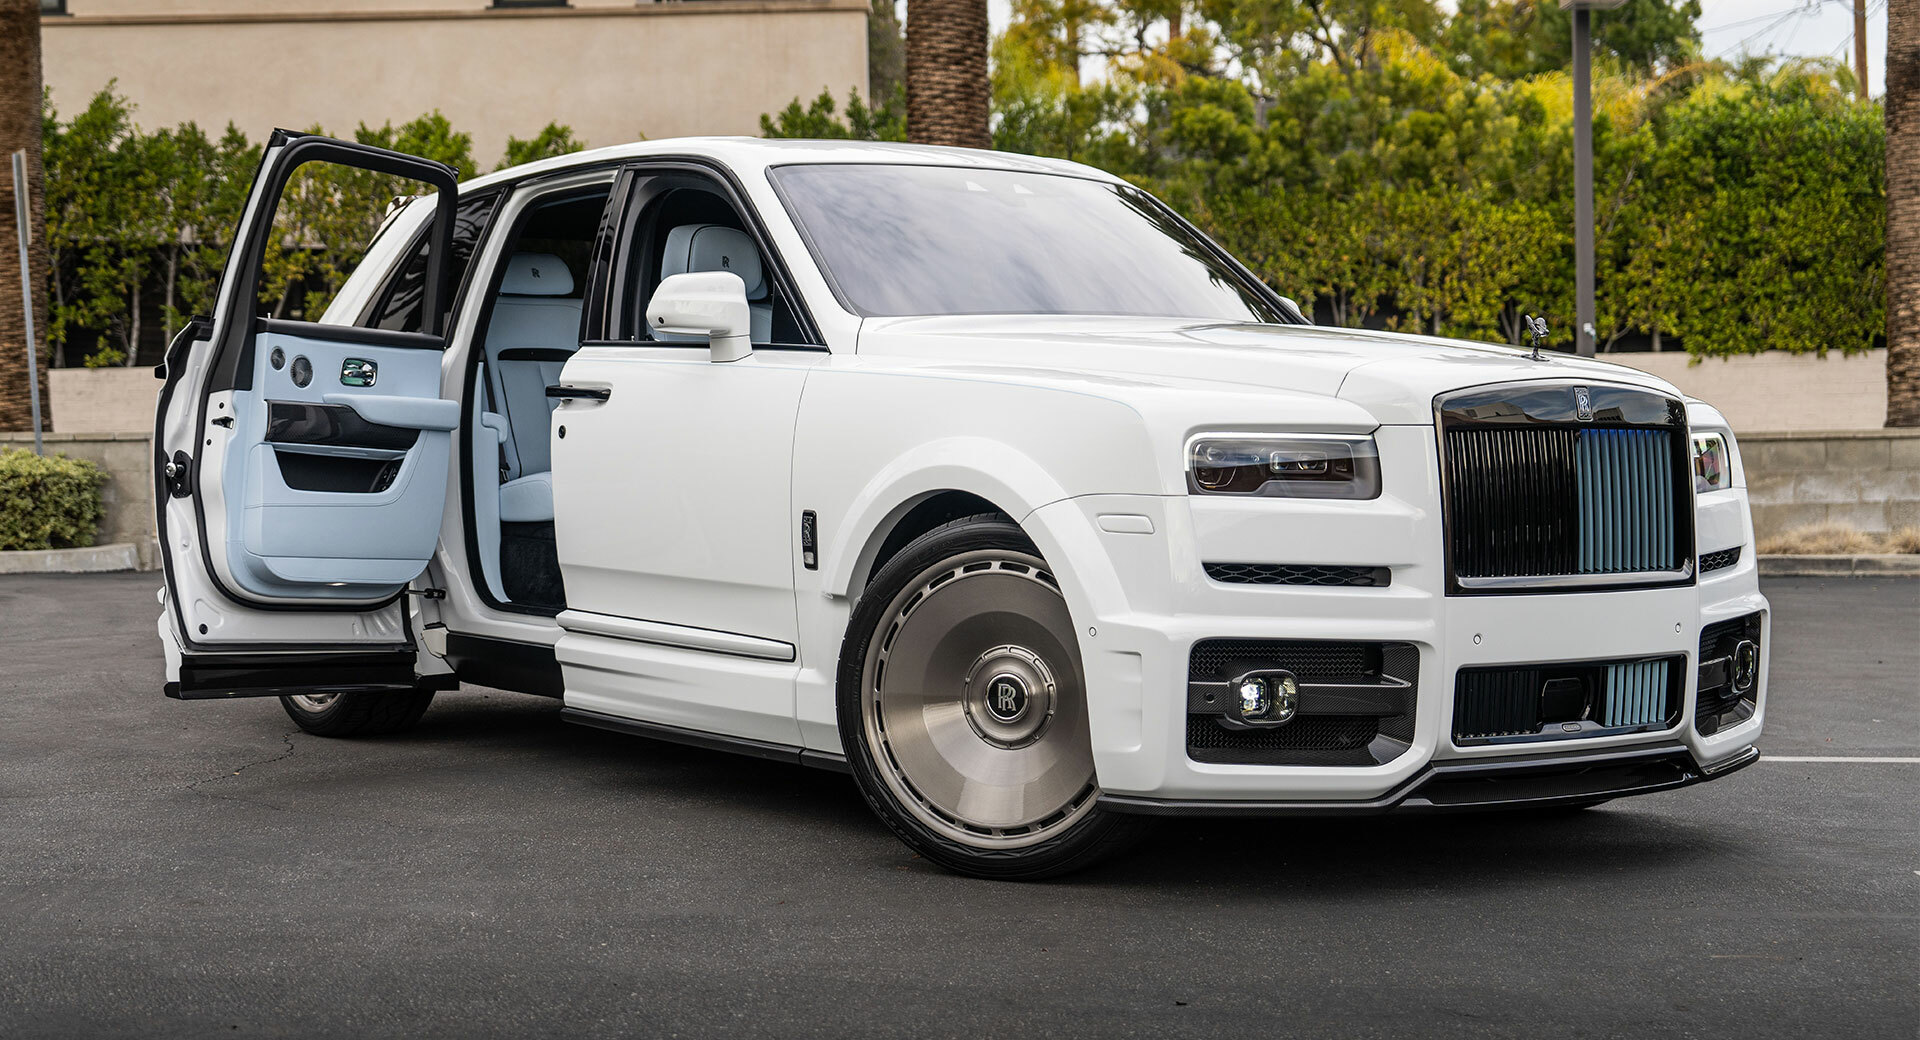 2023 Rolls-Royce Cullinan Prices, Reviews, and Pictures